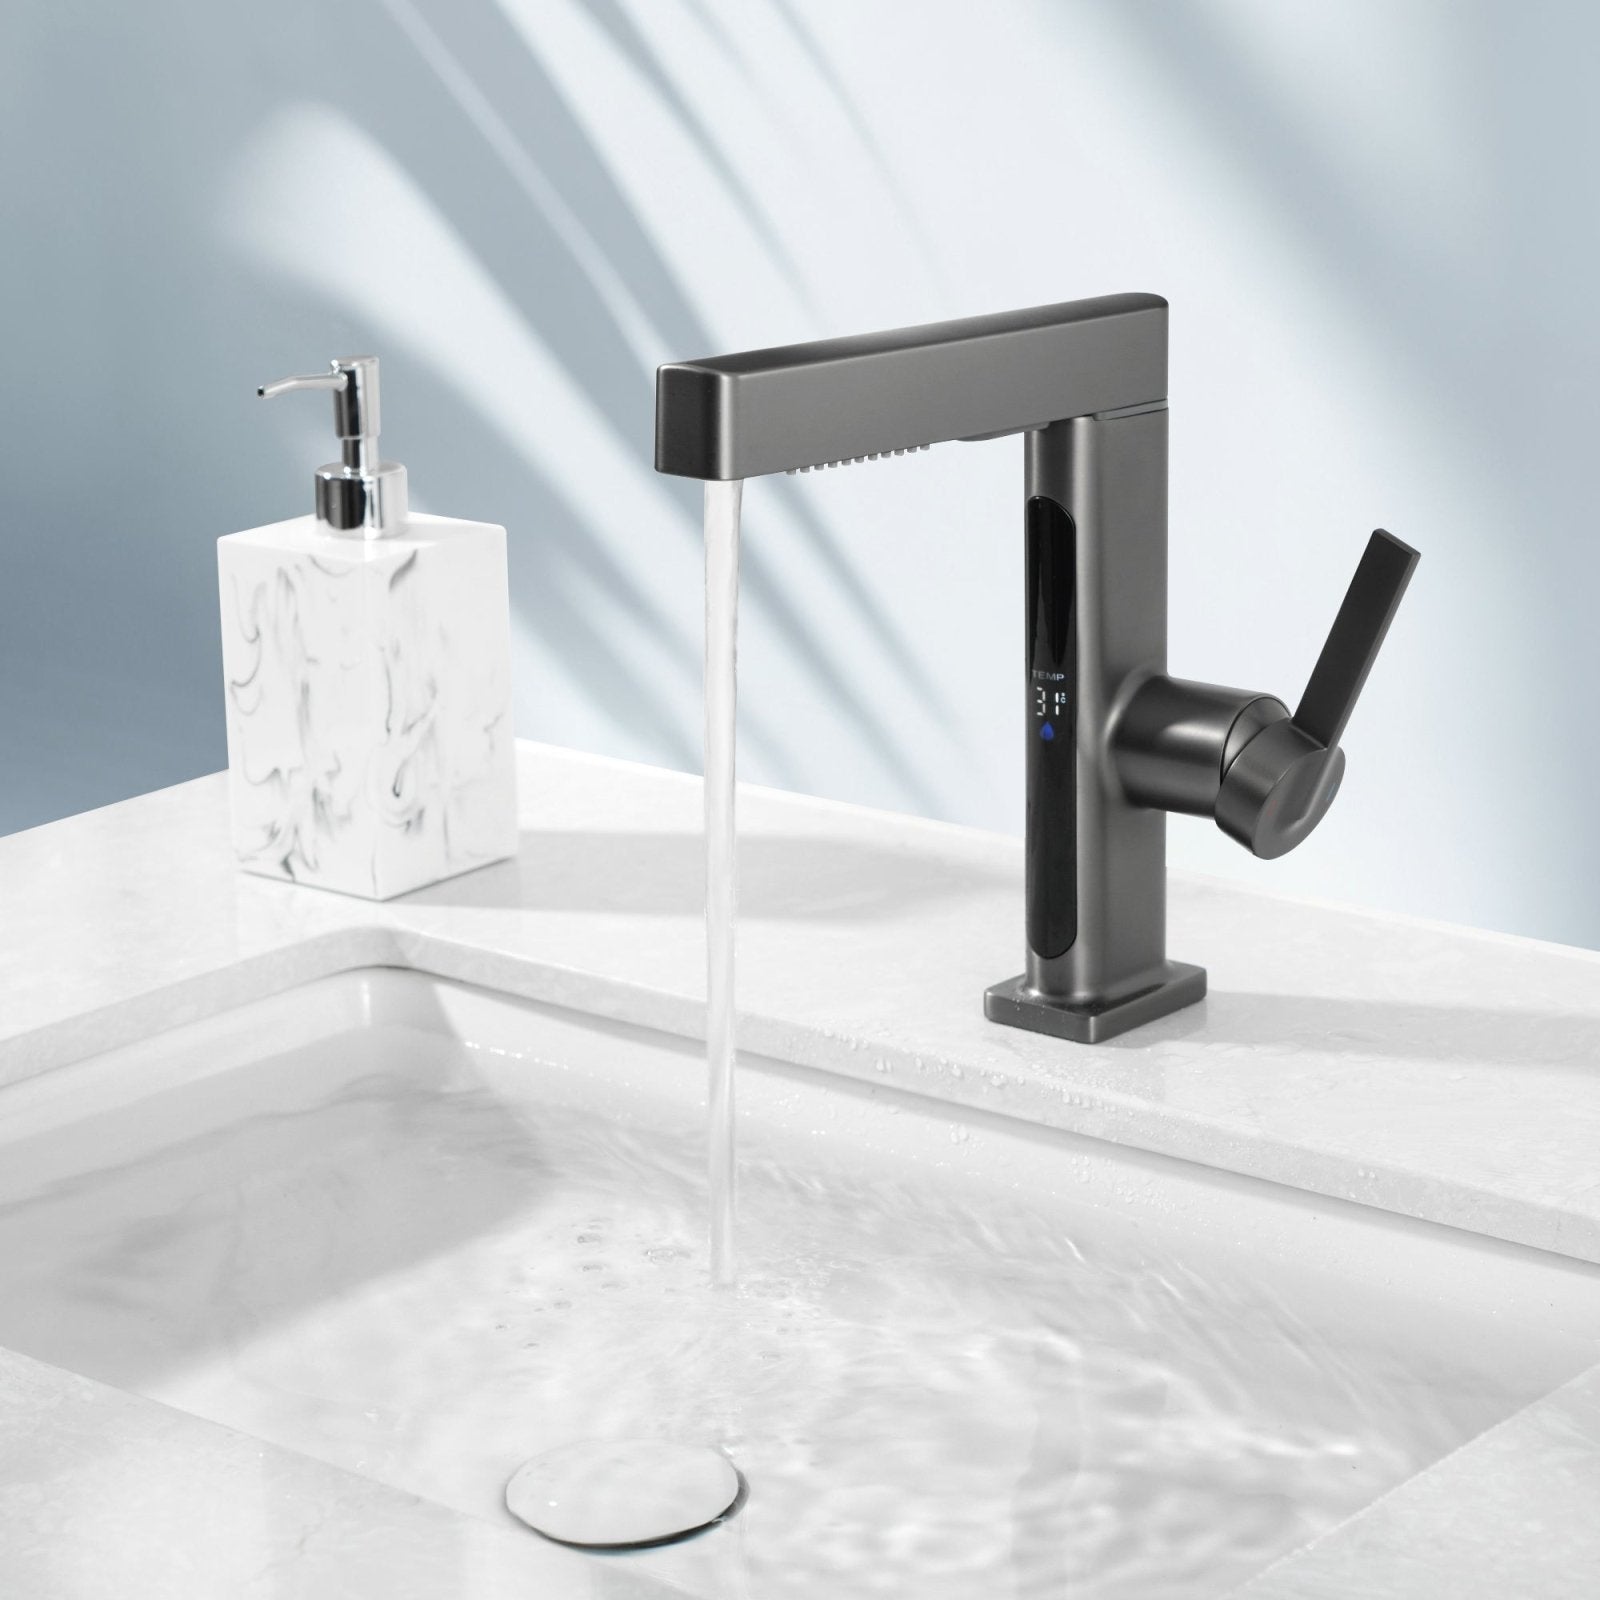 Lefton Single-Hole Pull-Out Faucet with Temperature Display-BF2206 -Bathroom Faucets- Lefton Home